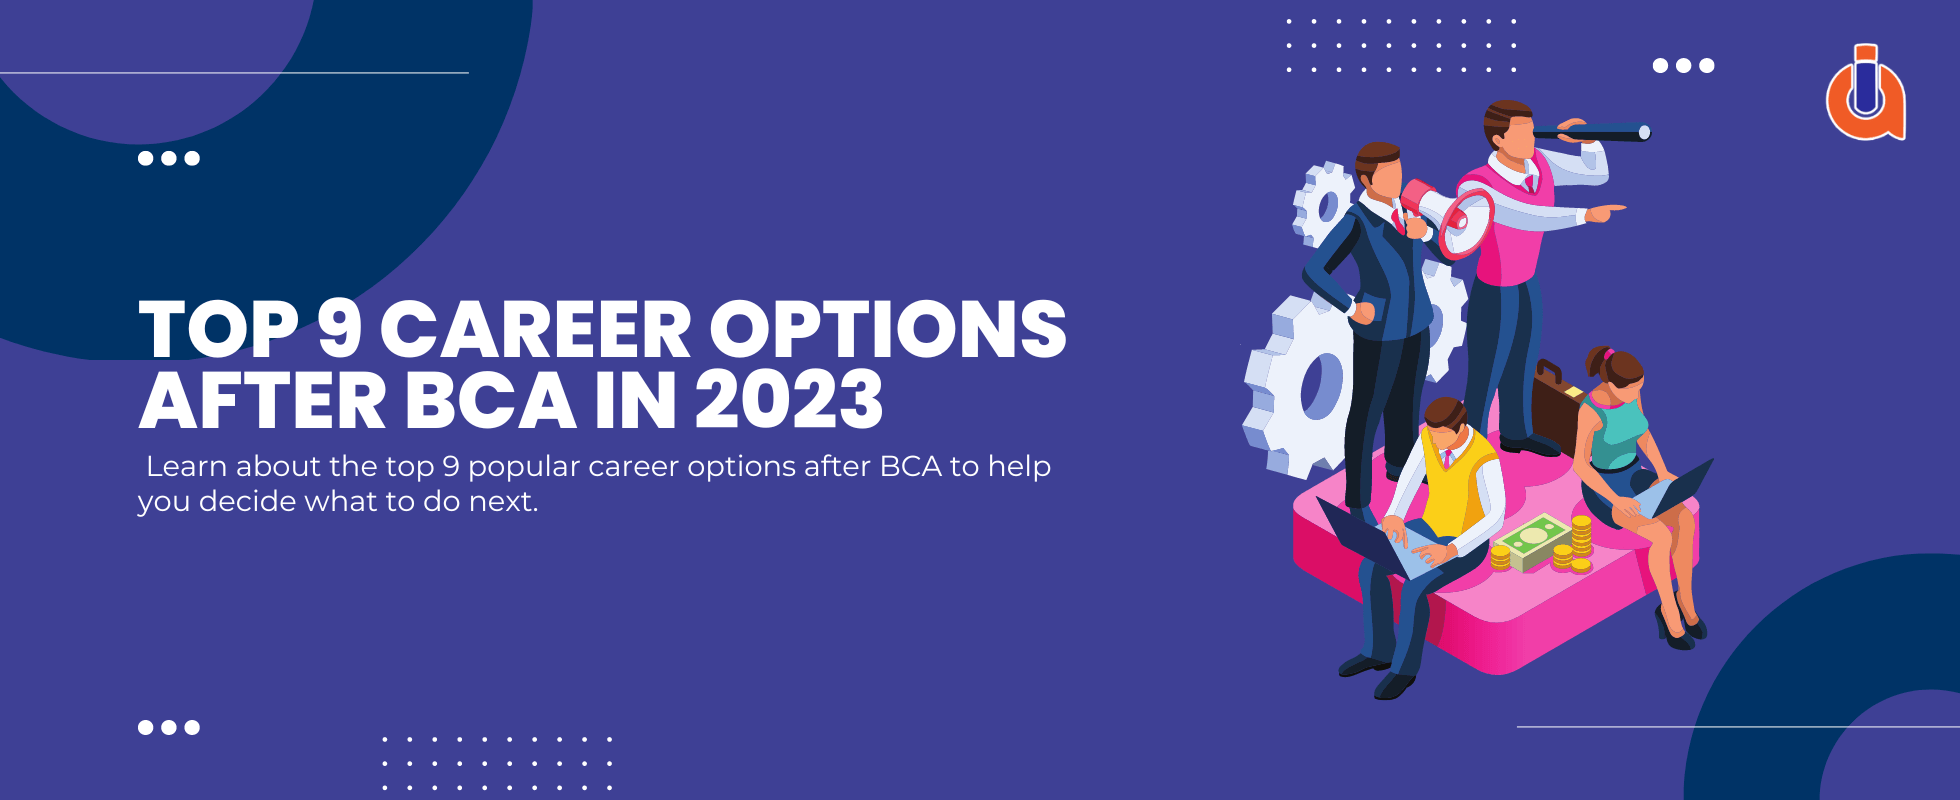 Top 9 Career Options After BCA in 2023 - InsideAIML